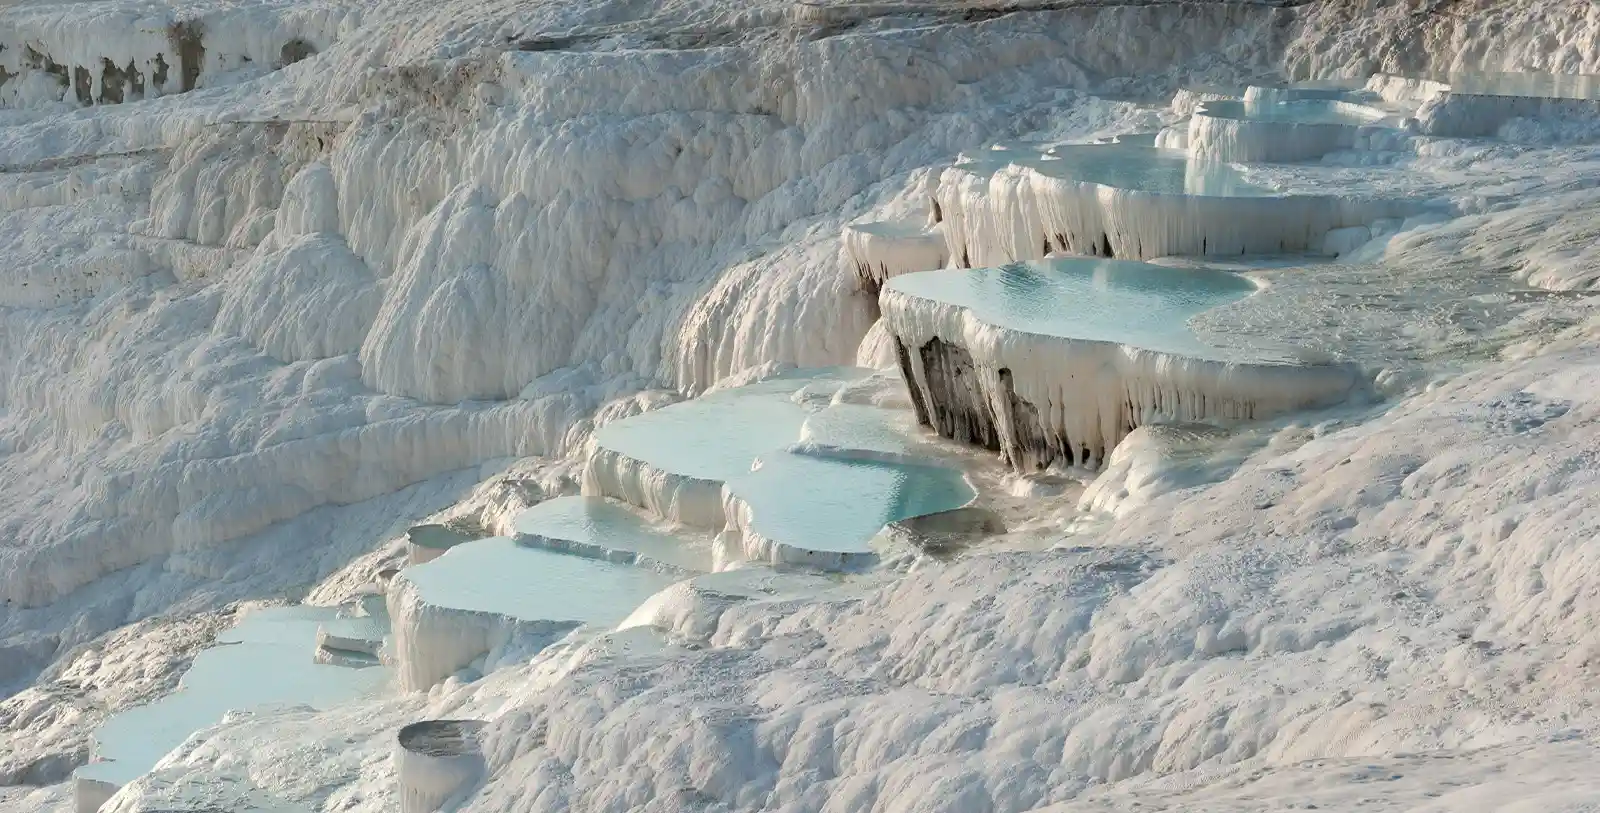 Pamukkale in Turkey. Turkey is a country with unbelievable natural miracles.